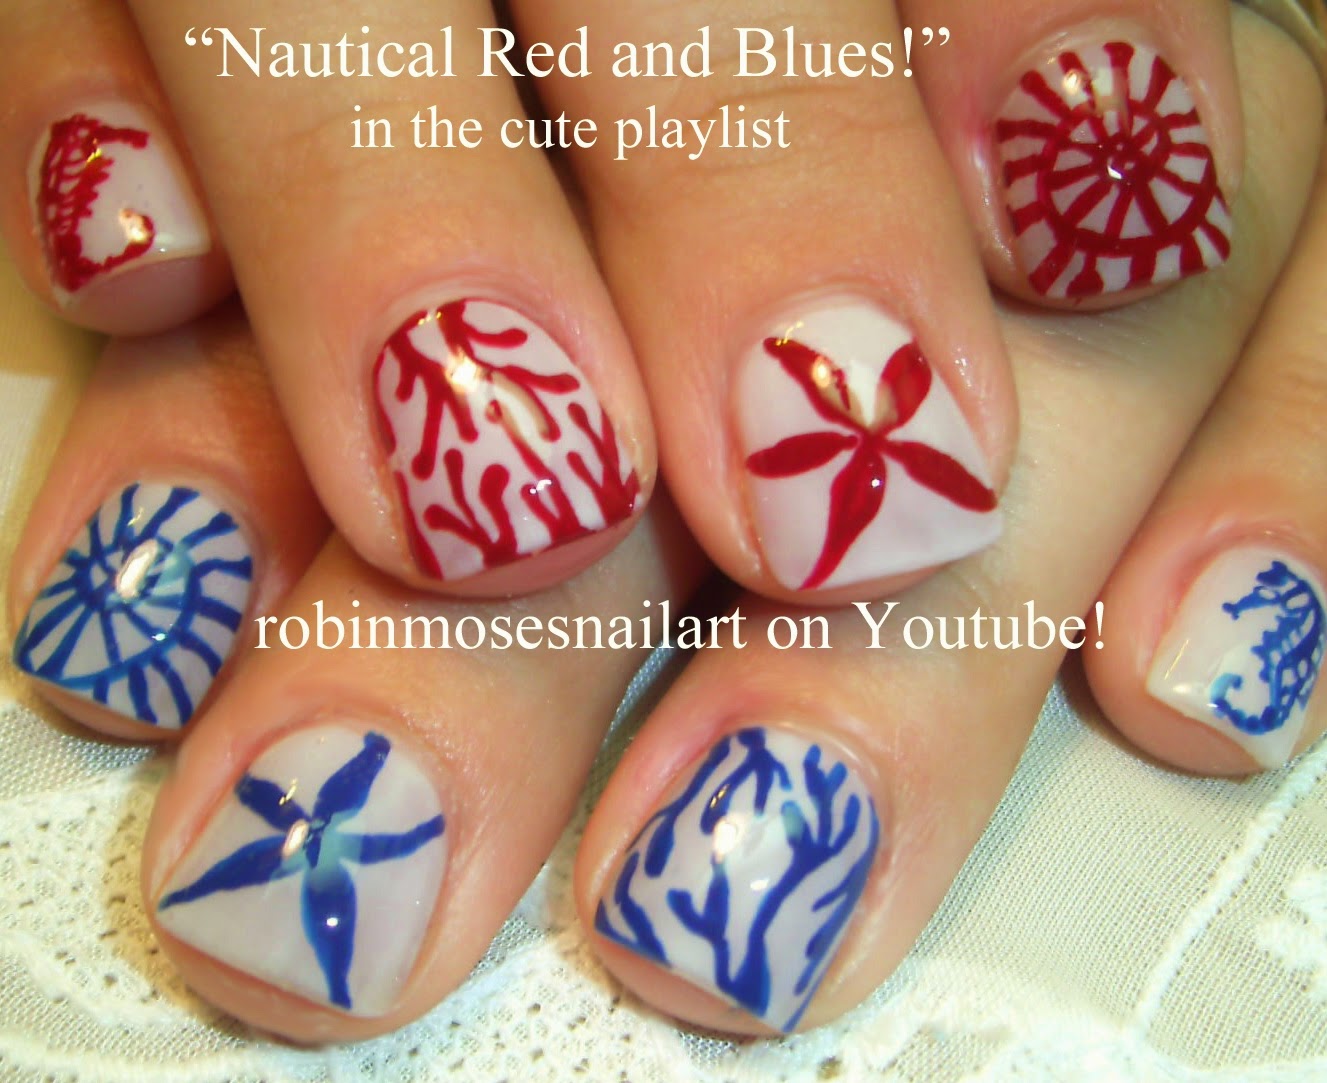 9. Nautical-Inspired Nail Art for a Classic Summer Look - wide 6